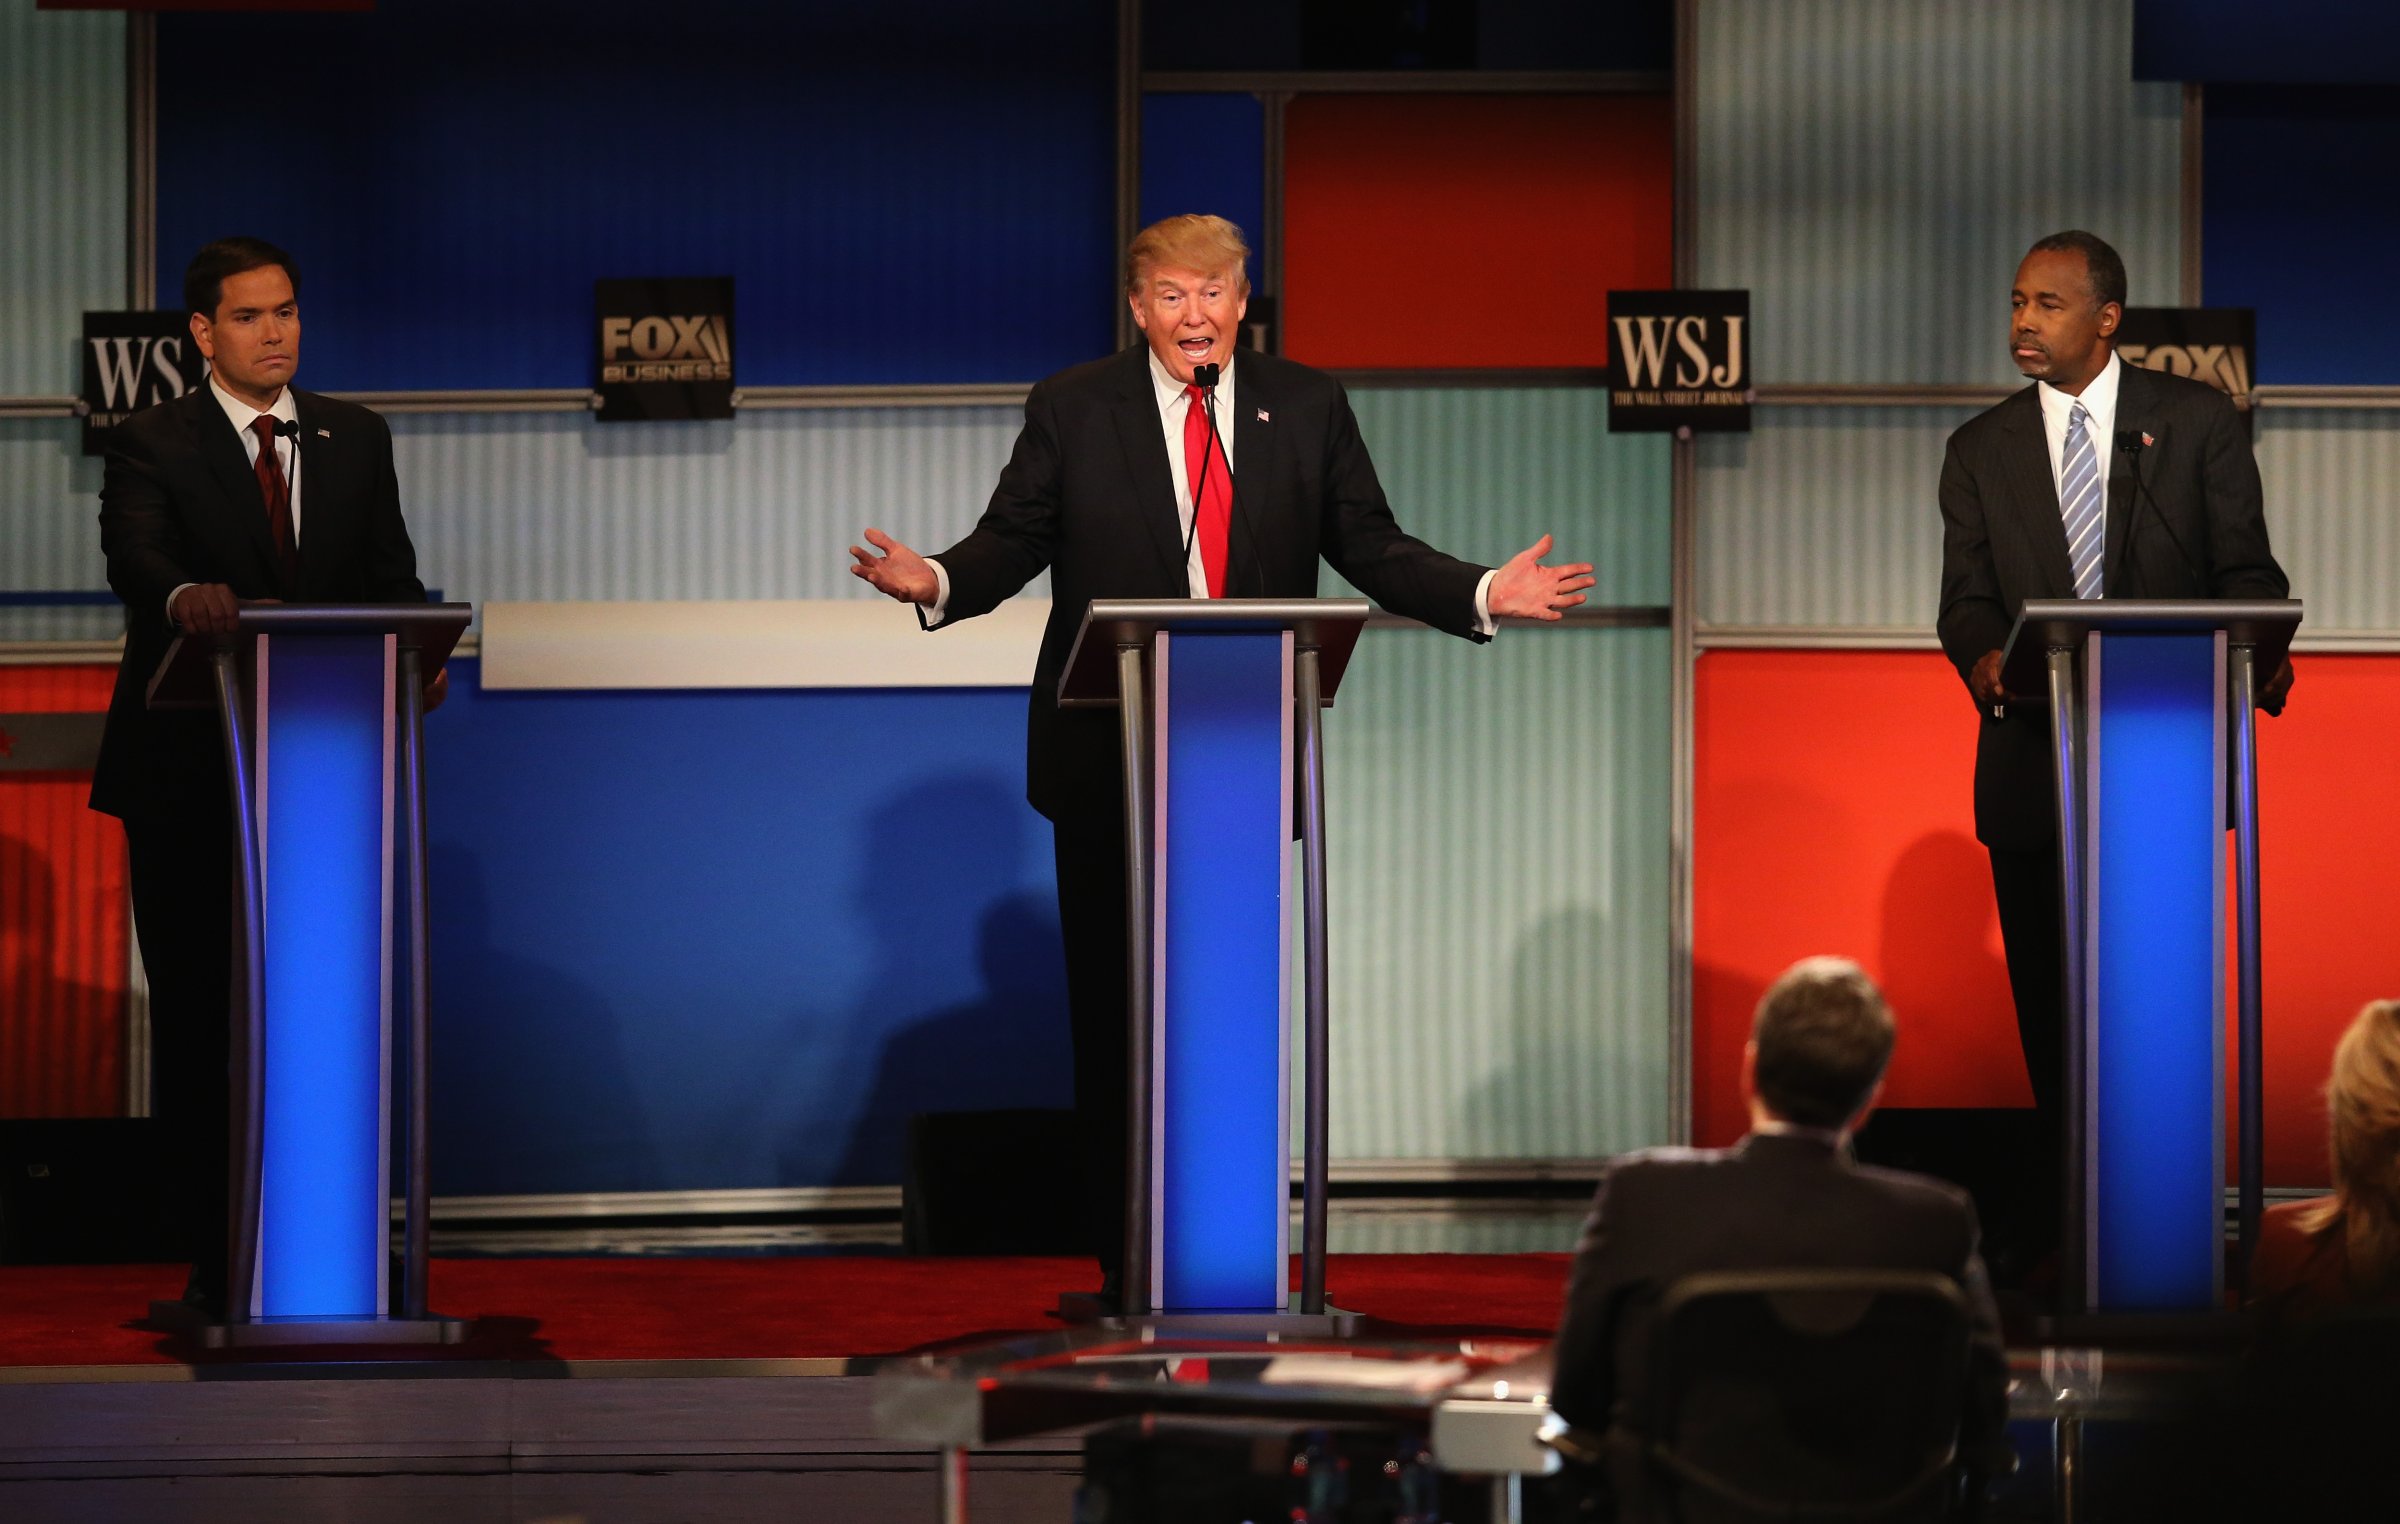 Presidential candidate Donald Trump (C) speaks while Sen. Marco Rubio (L) (R-FL), and Ben Carson look on during the Republican Presidential Debate sponsored by Fox Business and the Wall Street Journal in Milwaukee, Wisc., on Nov. 10, 2015.